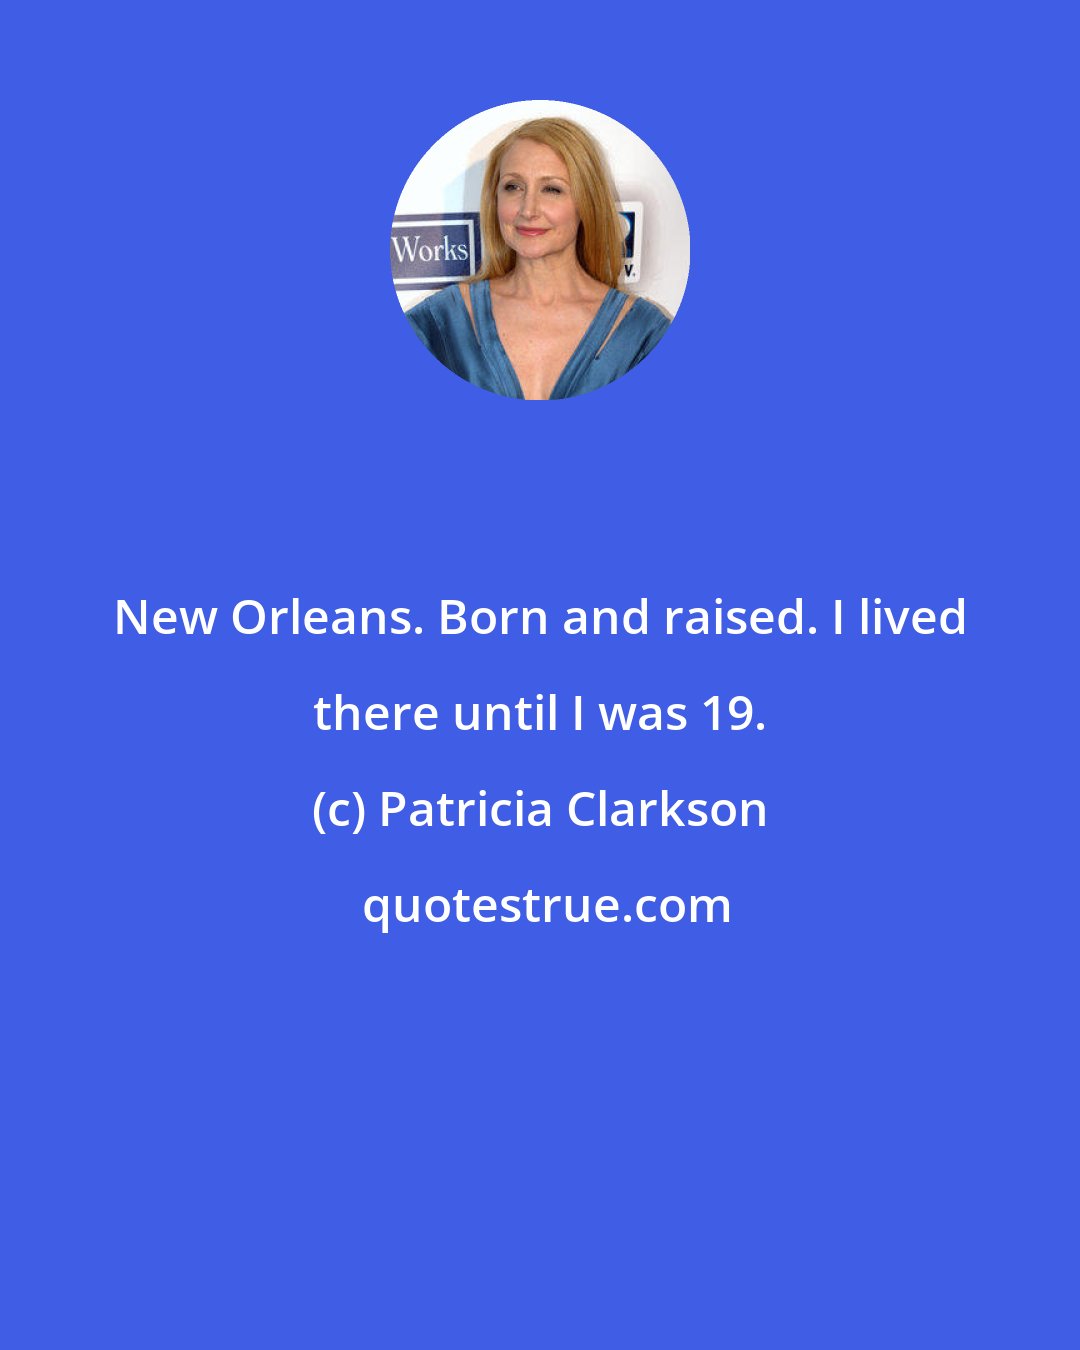 Patricia Clarkson: New Orleans. Born and raised. I lived there until I was 19.